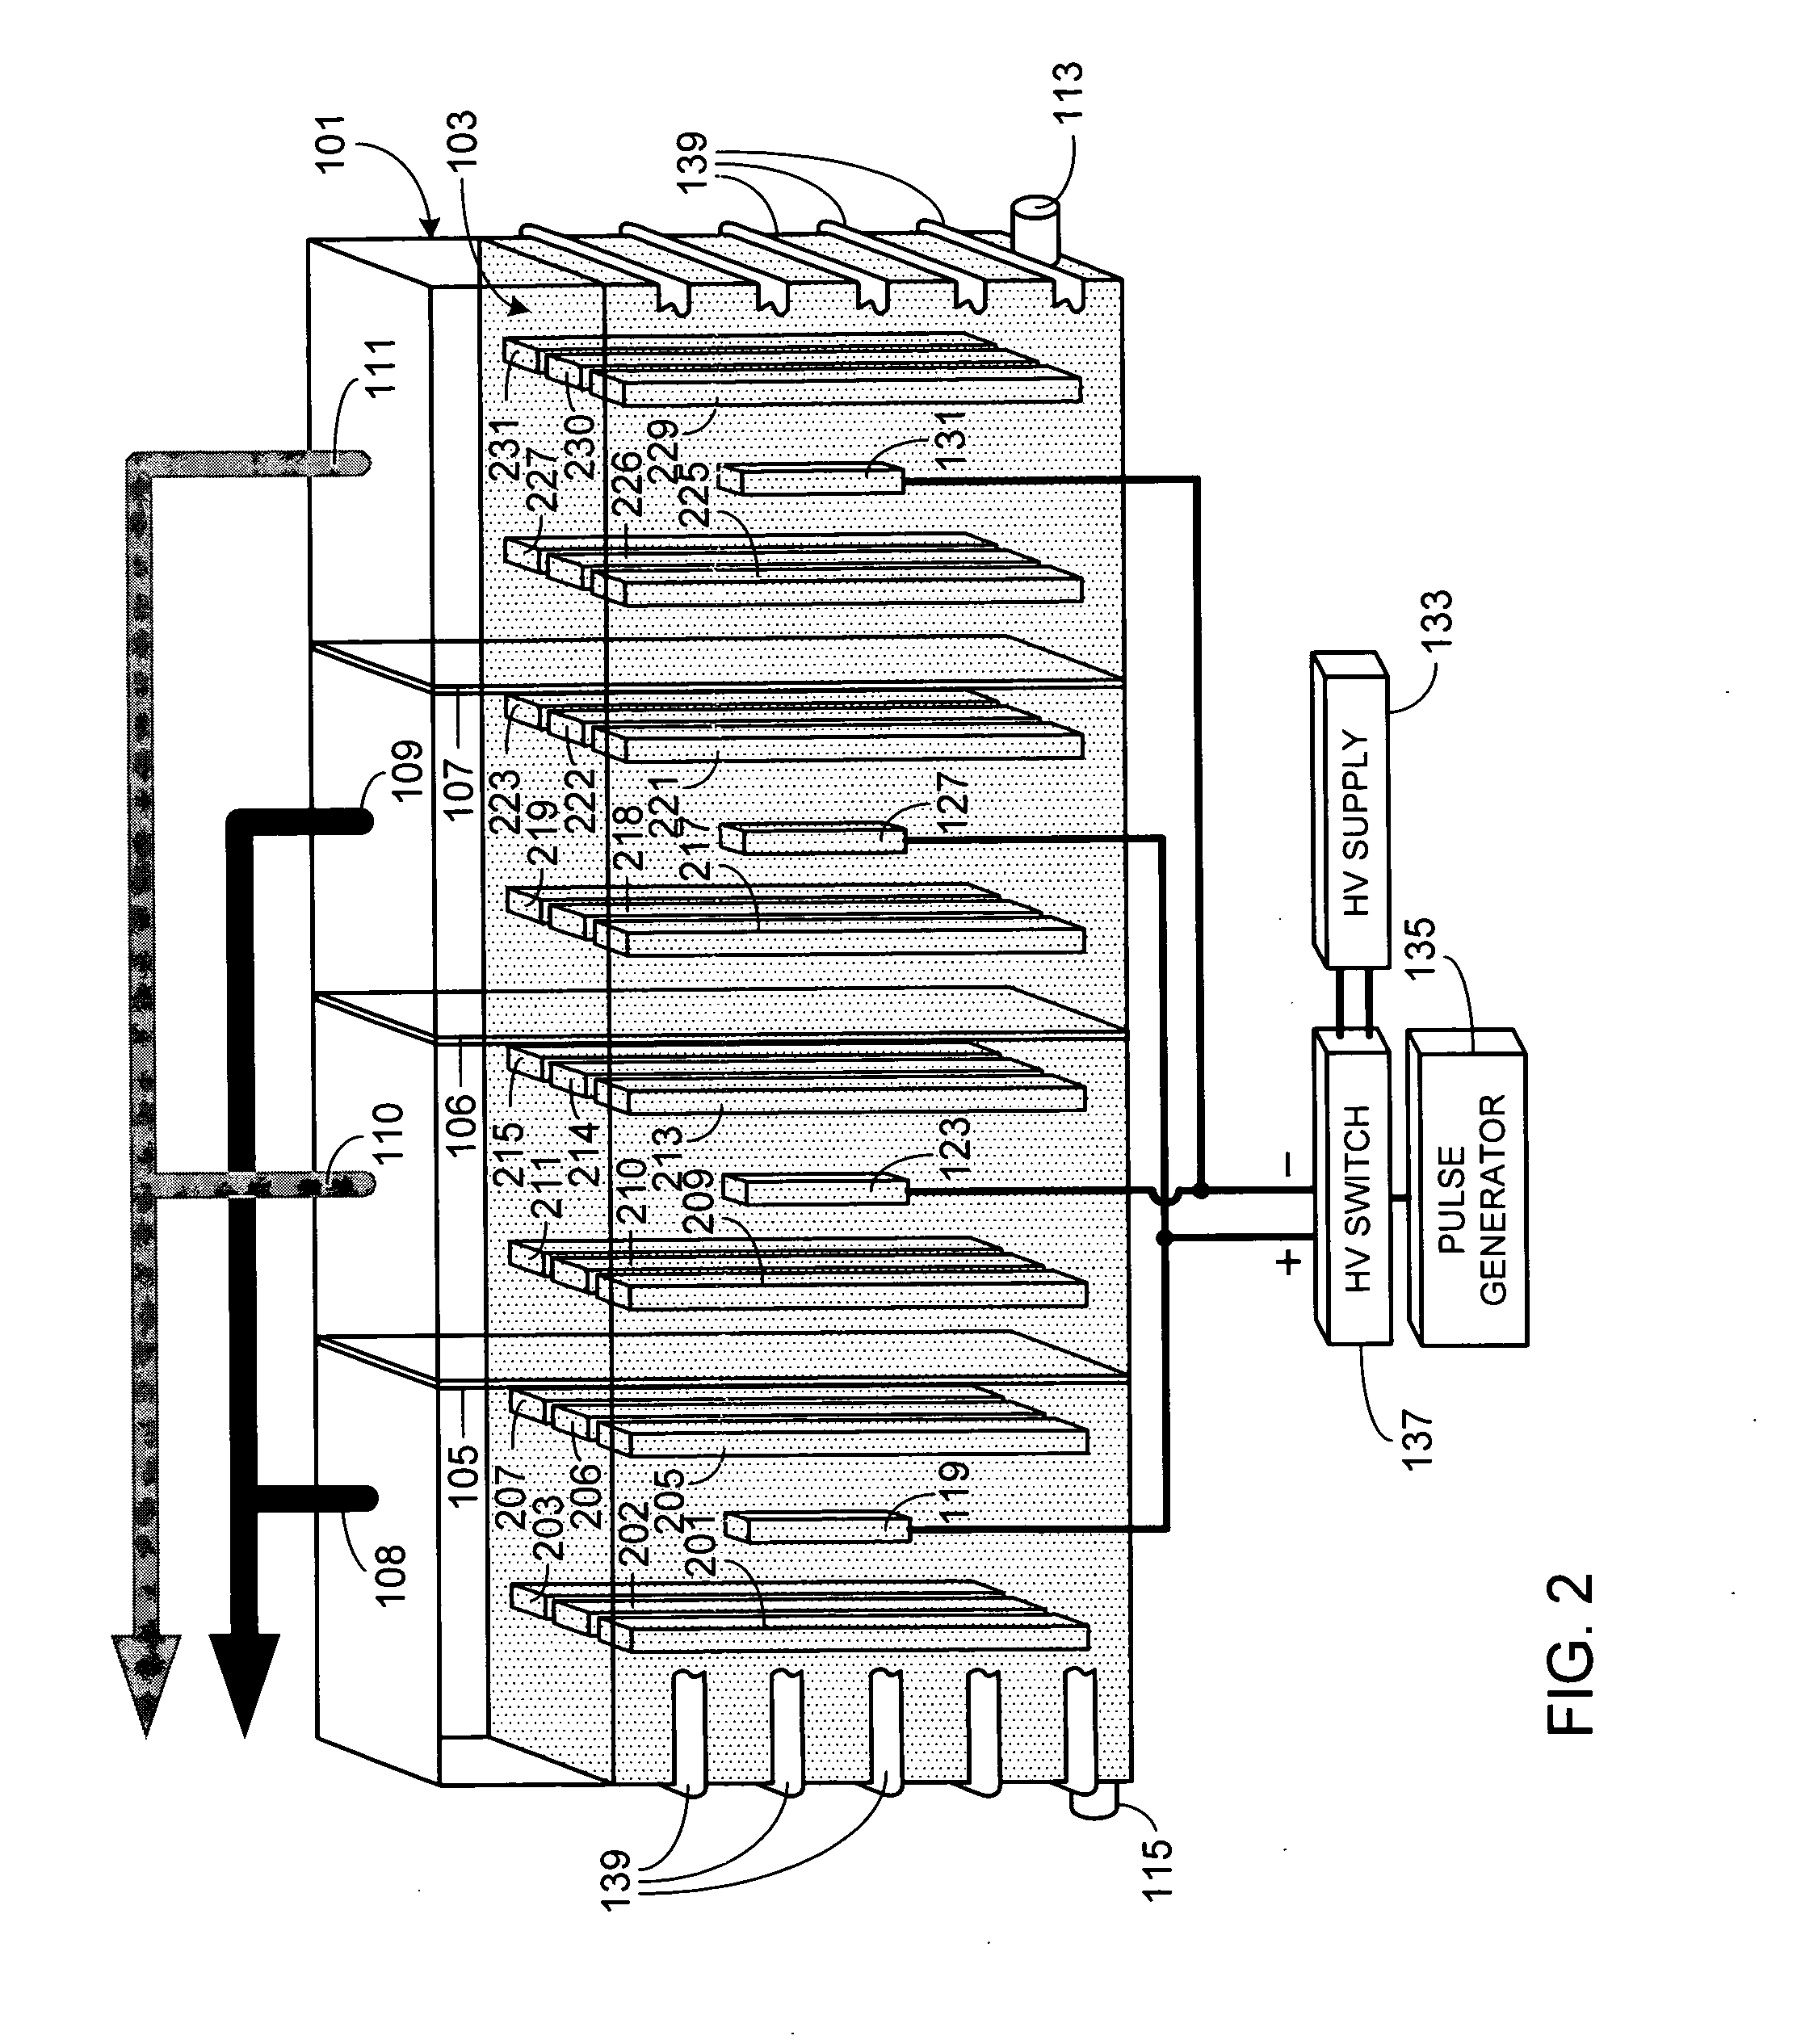 Multi-cell single voltage electrolysis apparatus and method of using same